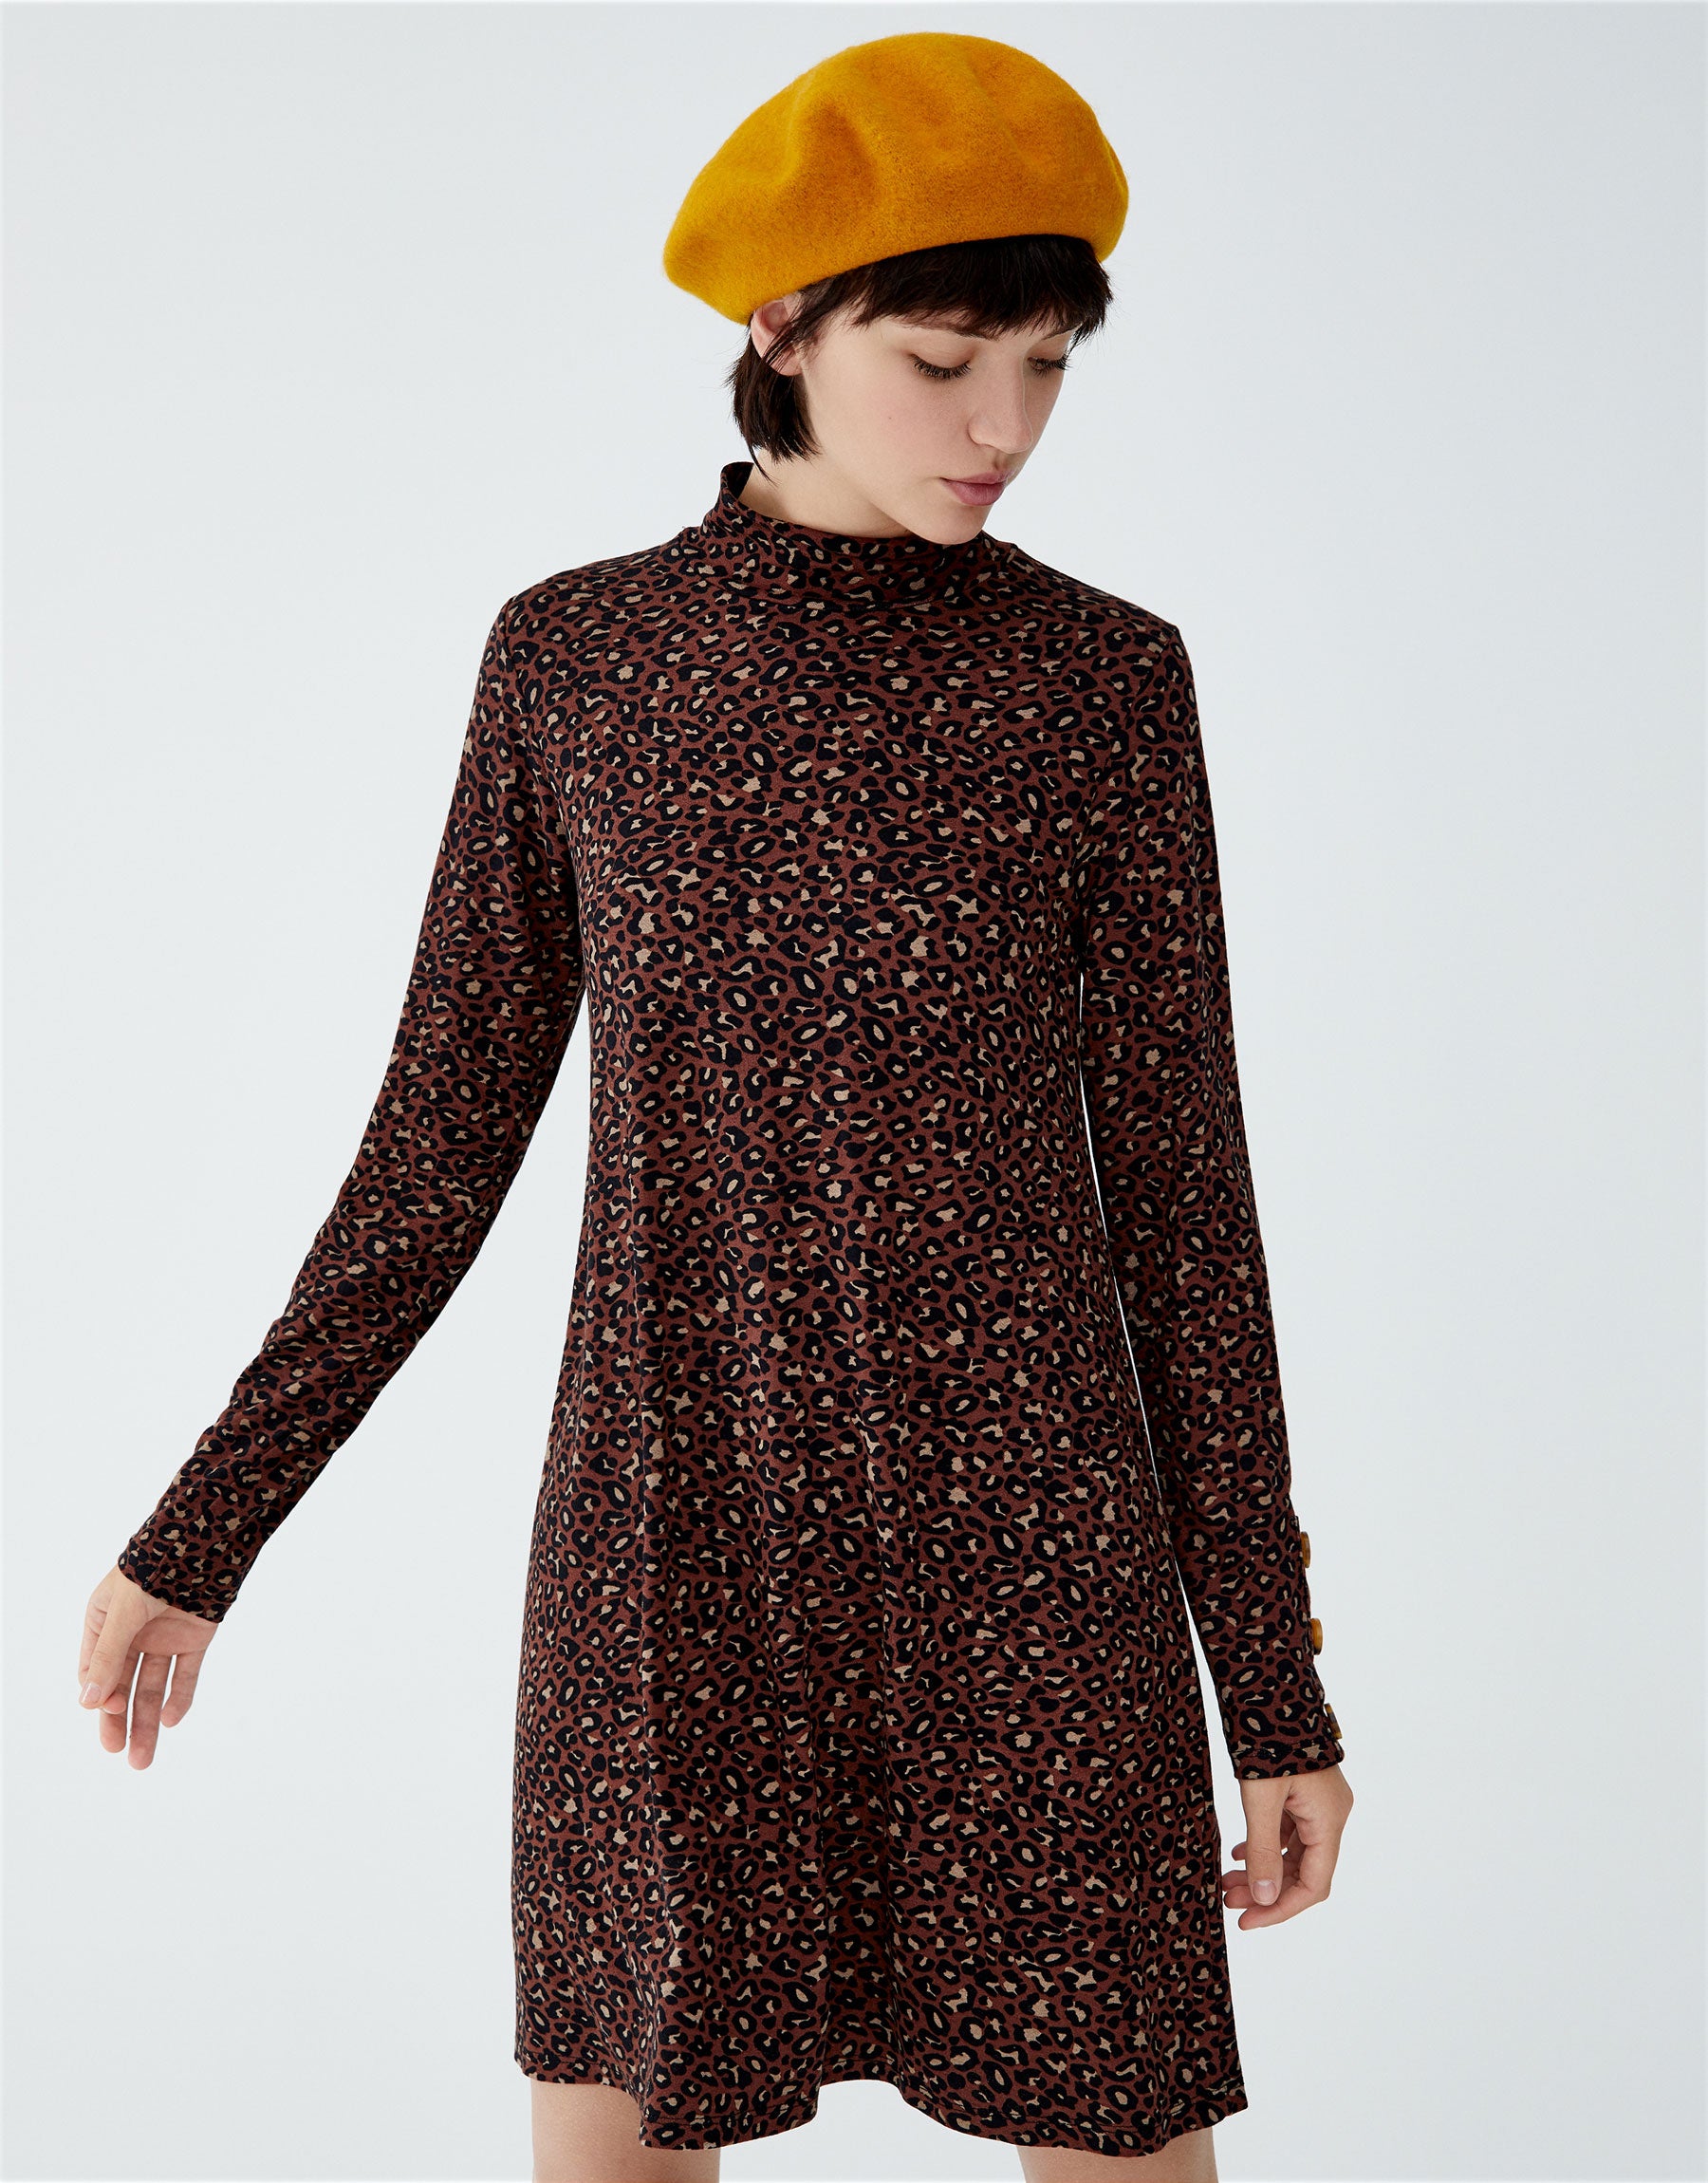 Long Sleeve Dress With Buttons